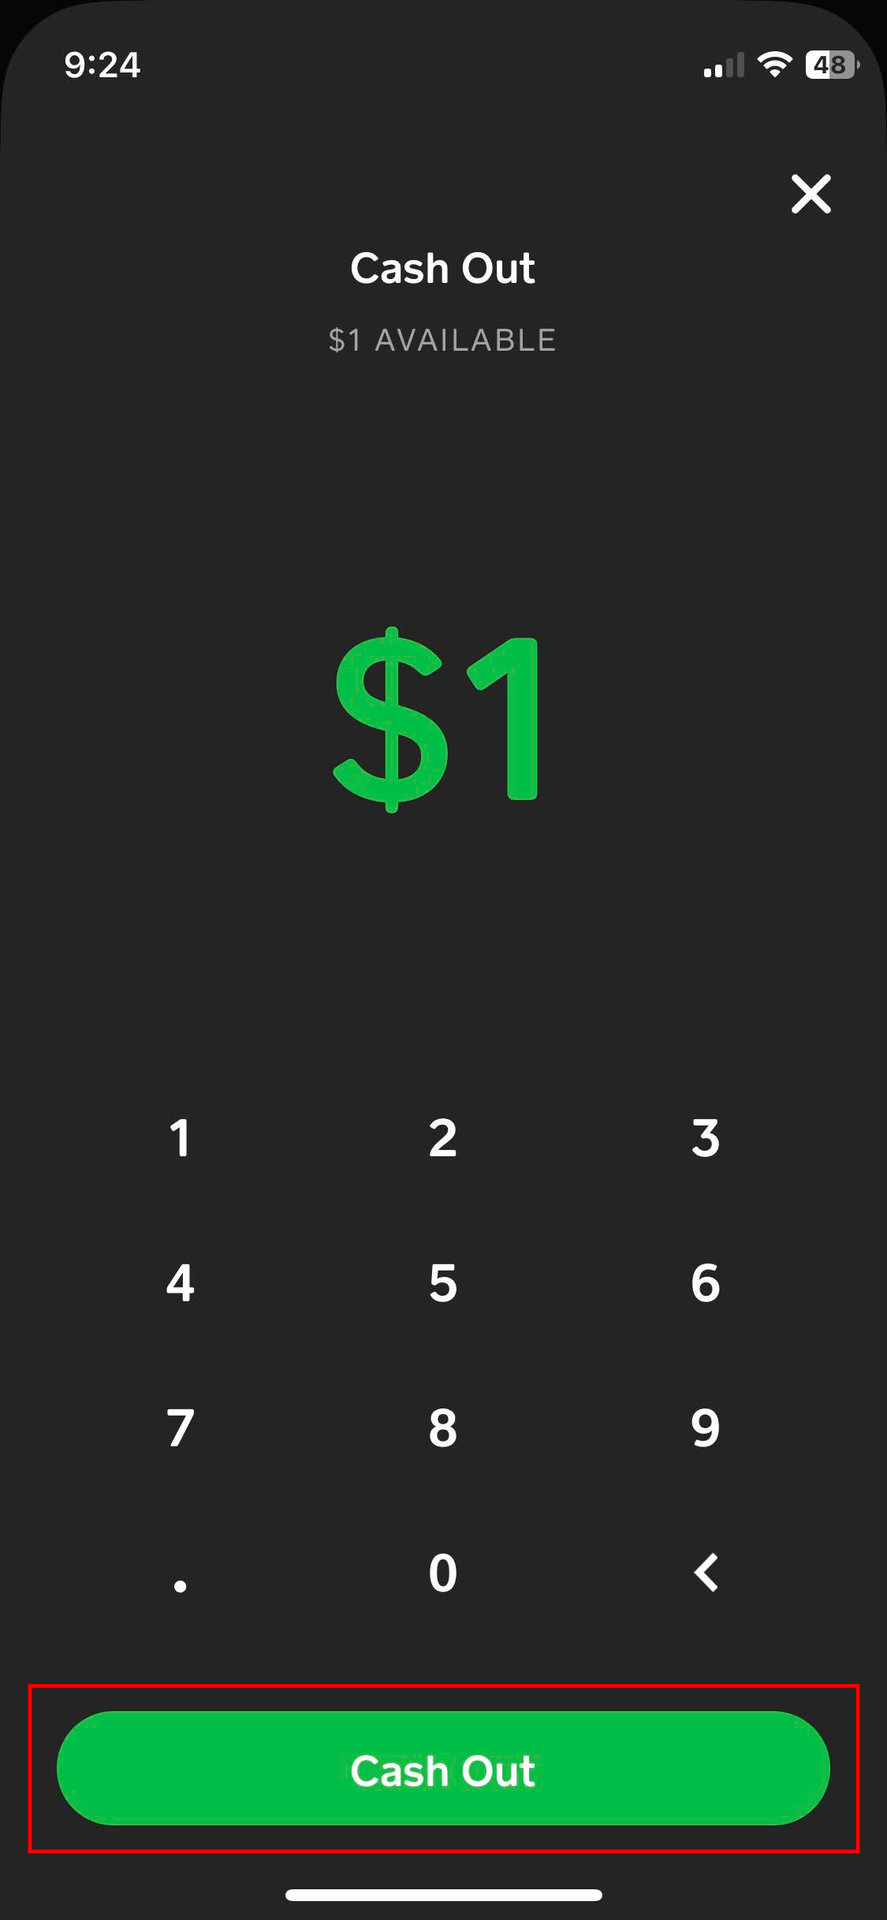 How to Cash Out on Cash App 2